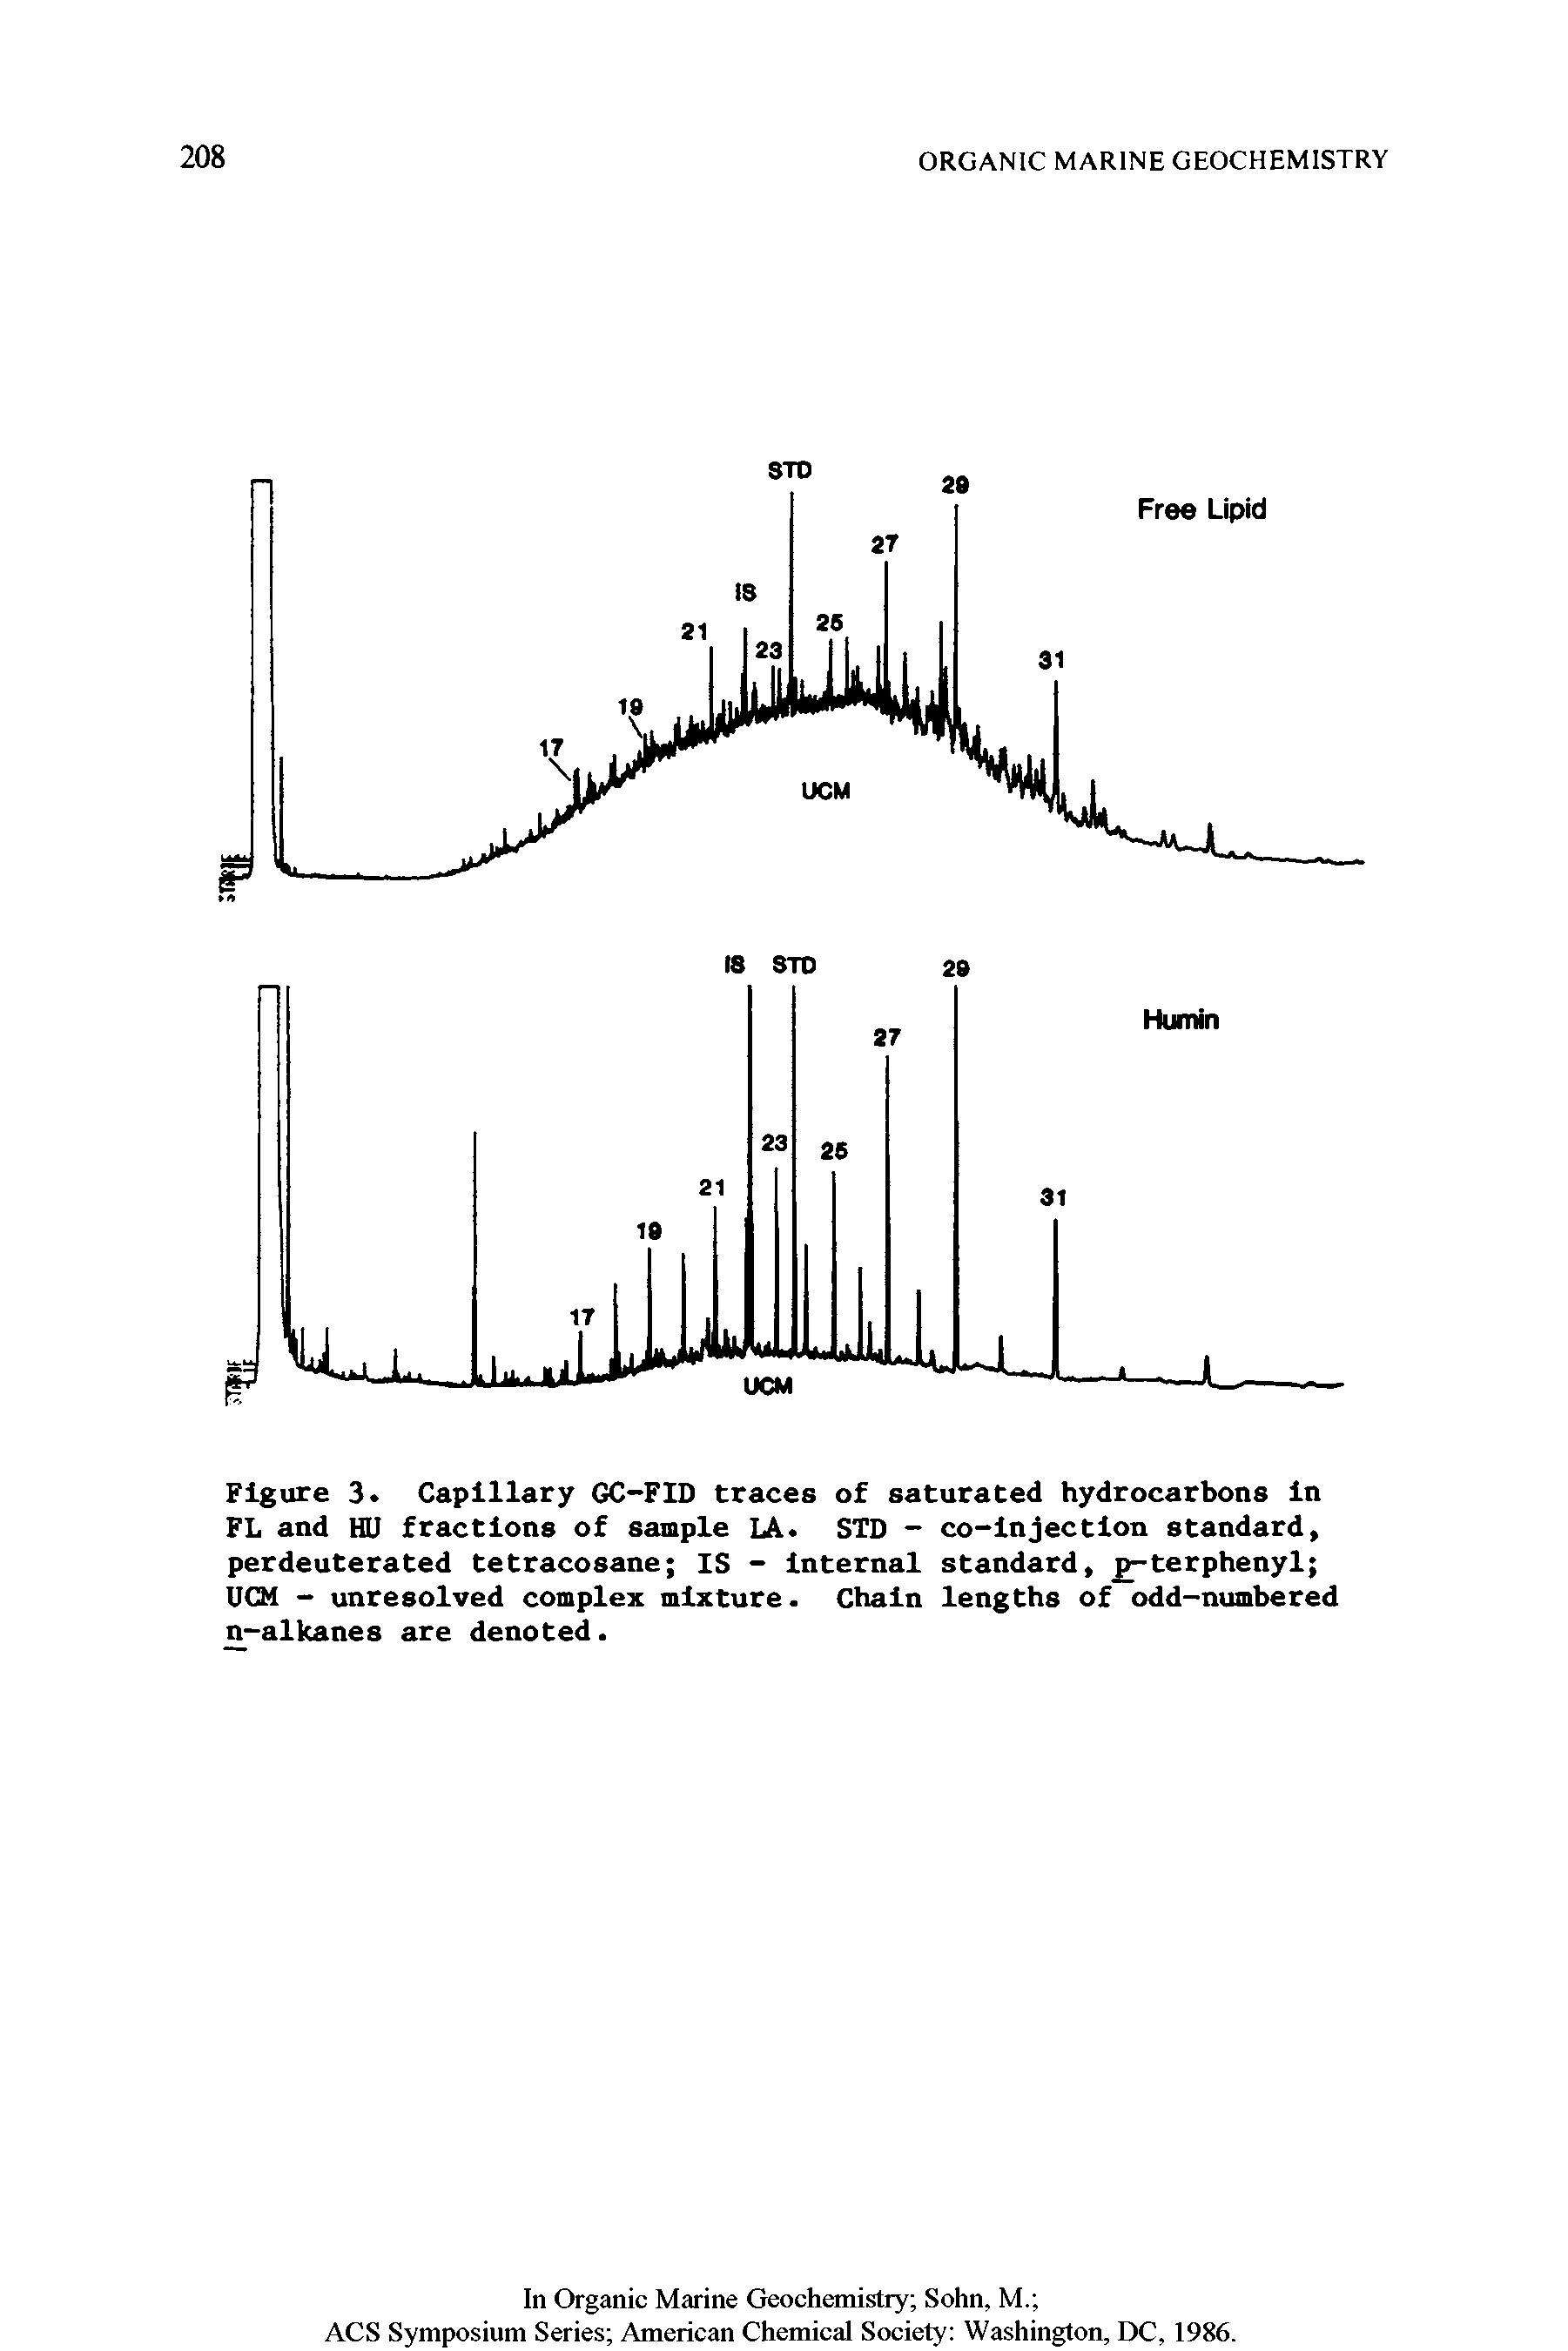 Figure 3. Capillary GC-FID traces of saturated hydrocarbons in FL and HU fractions of sample LA. STD - co-injection standard, perdeuterated tetracosane IS - Internal standard, -terphenyl UCM - unresolved complex mixture. Chain lengths of odd-numbered n-alkanes are denoted.